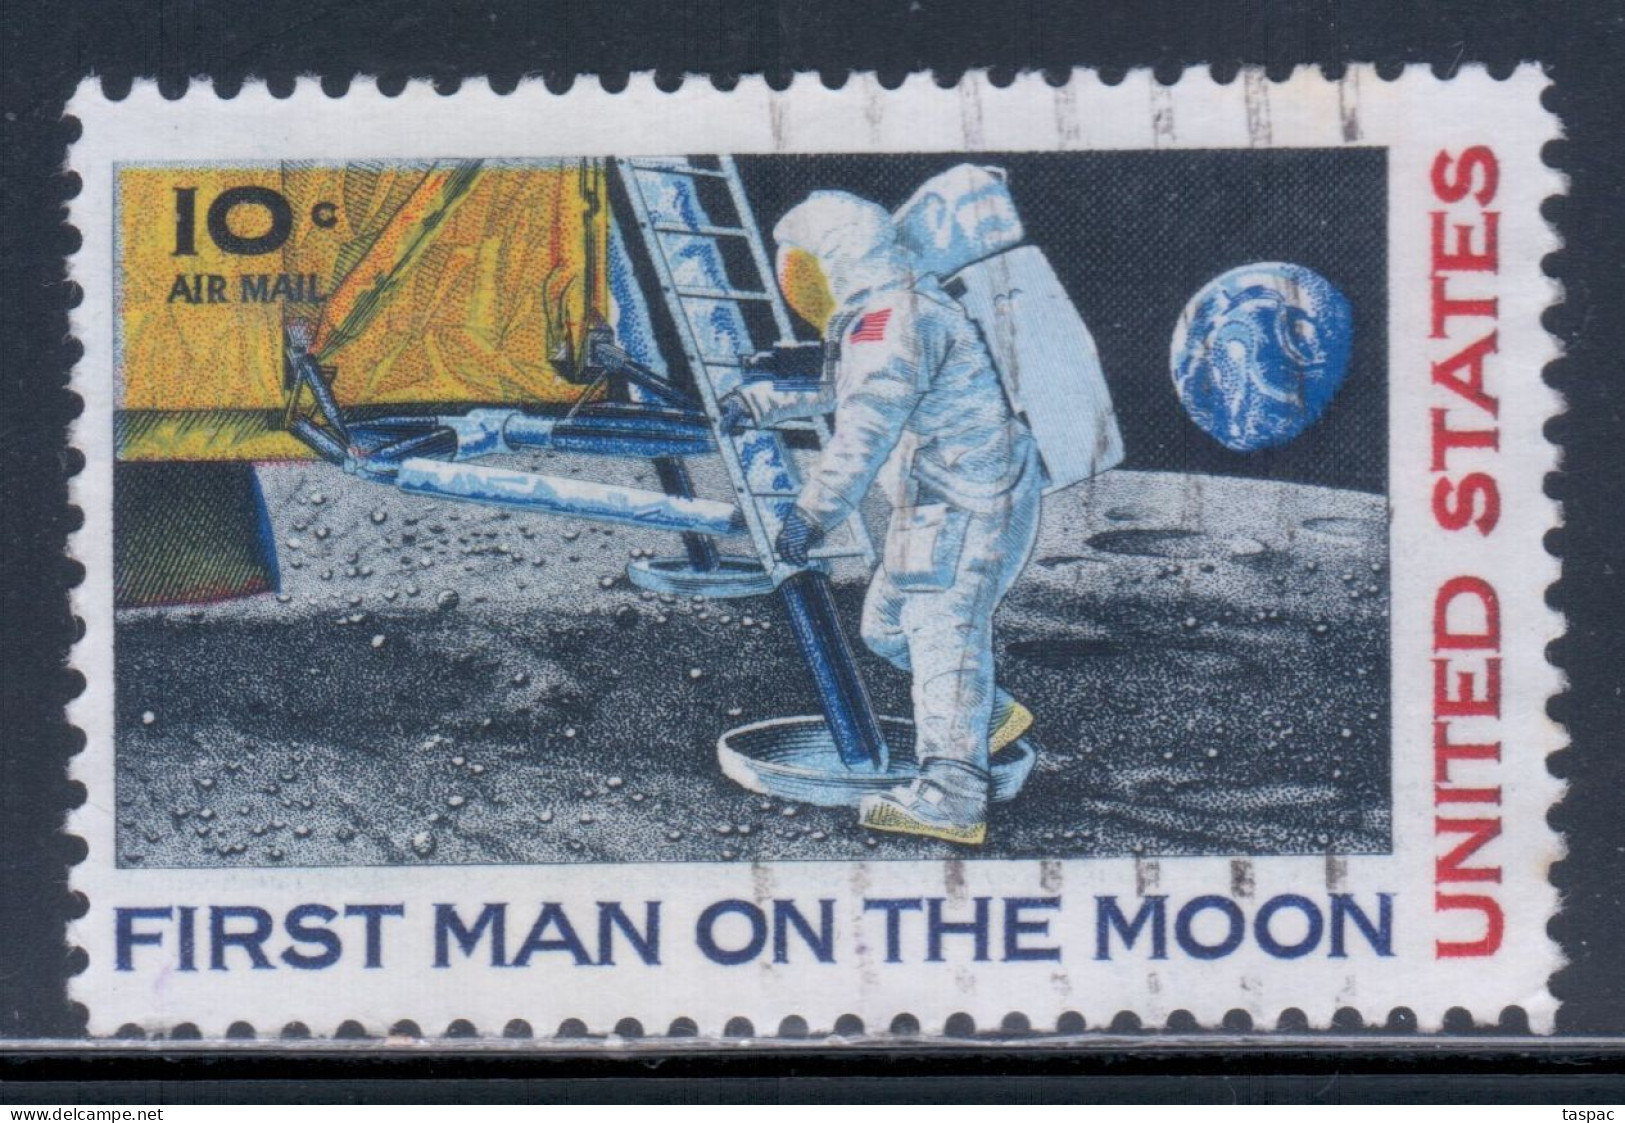 United States 1969 Mi# 990 Used - First Man On The Moon / Space - USA